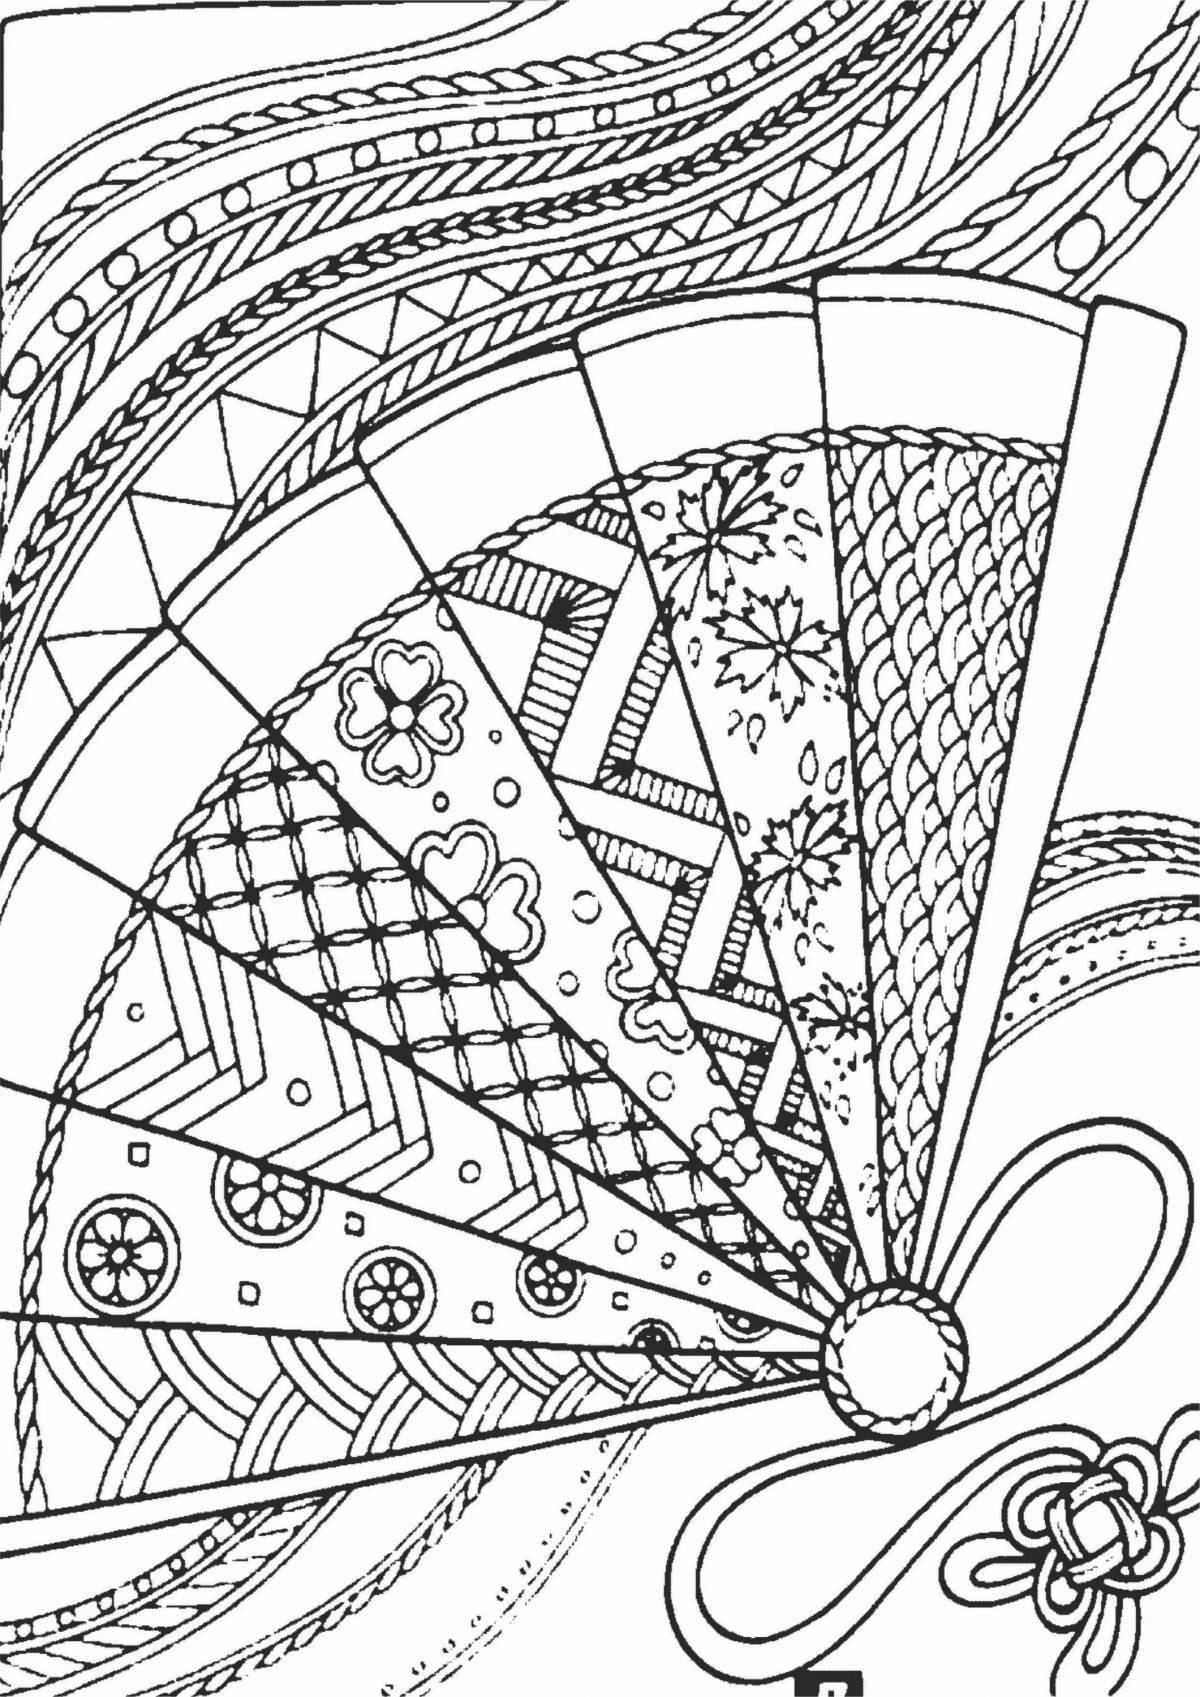 Colorful zendoodle coloring page